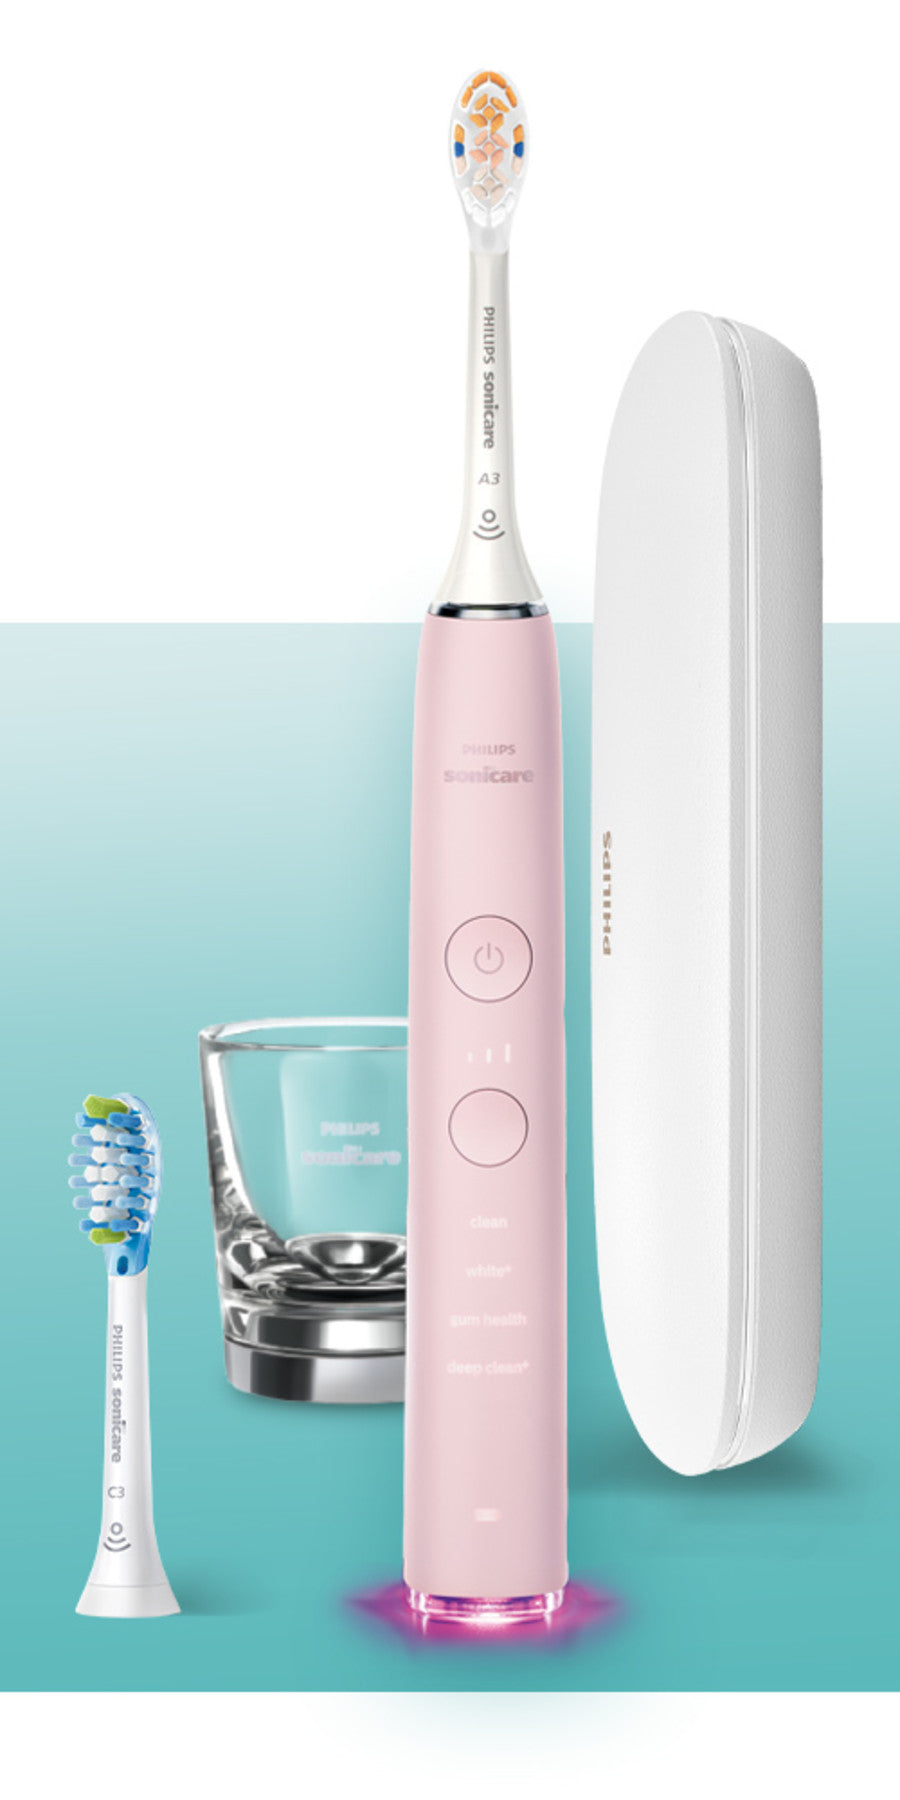 Philips Sonicare DiamondClean Smart Electric, Rechargeable Toothbrush for Complete Oral Care – 9300 Series - Pink_4